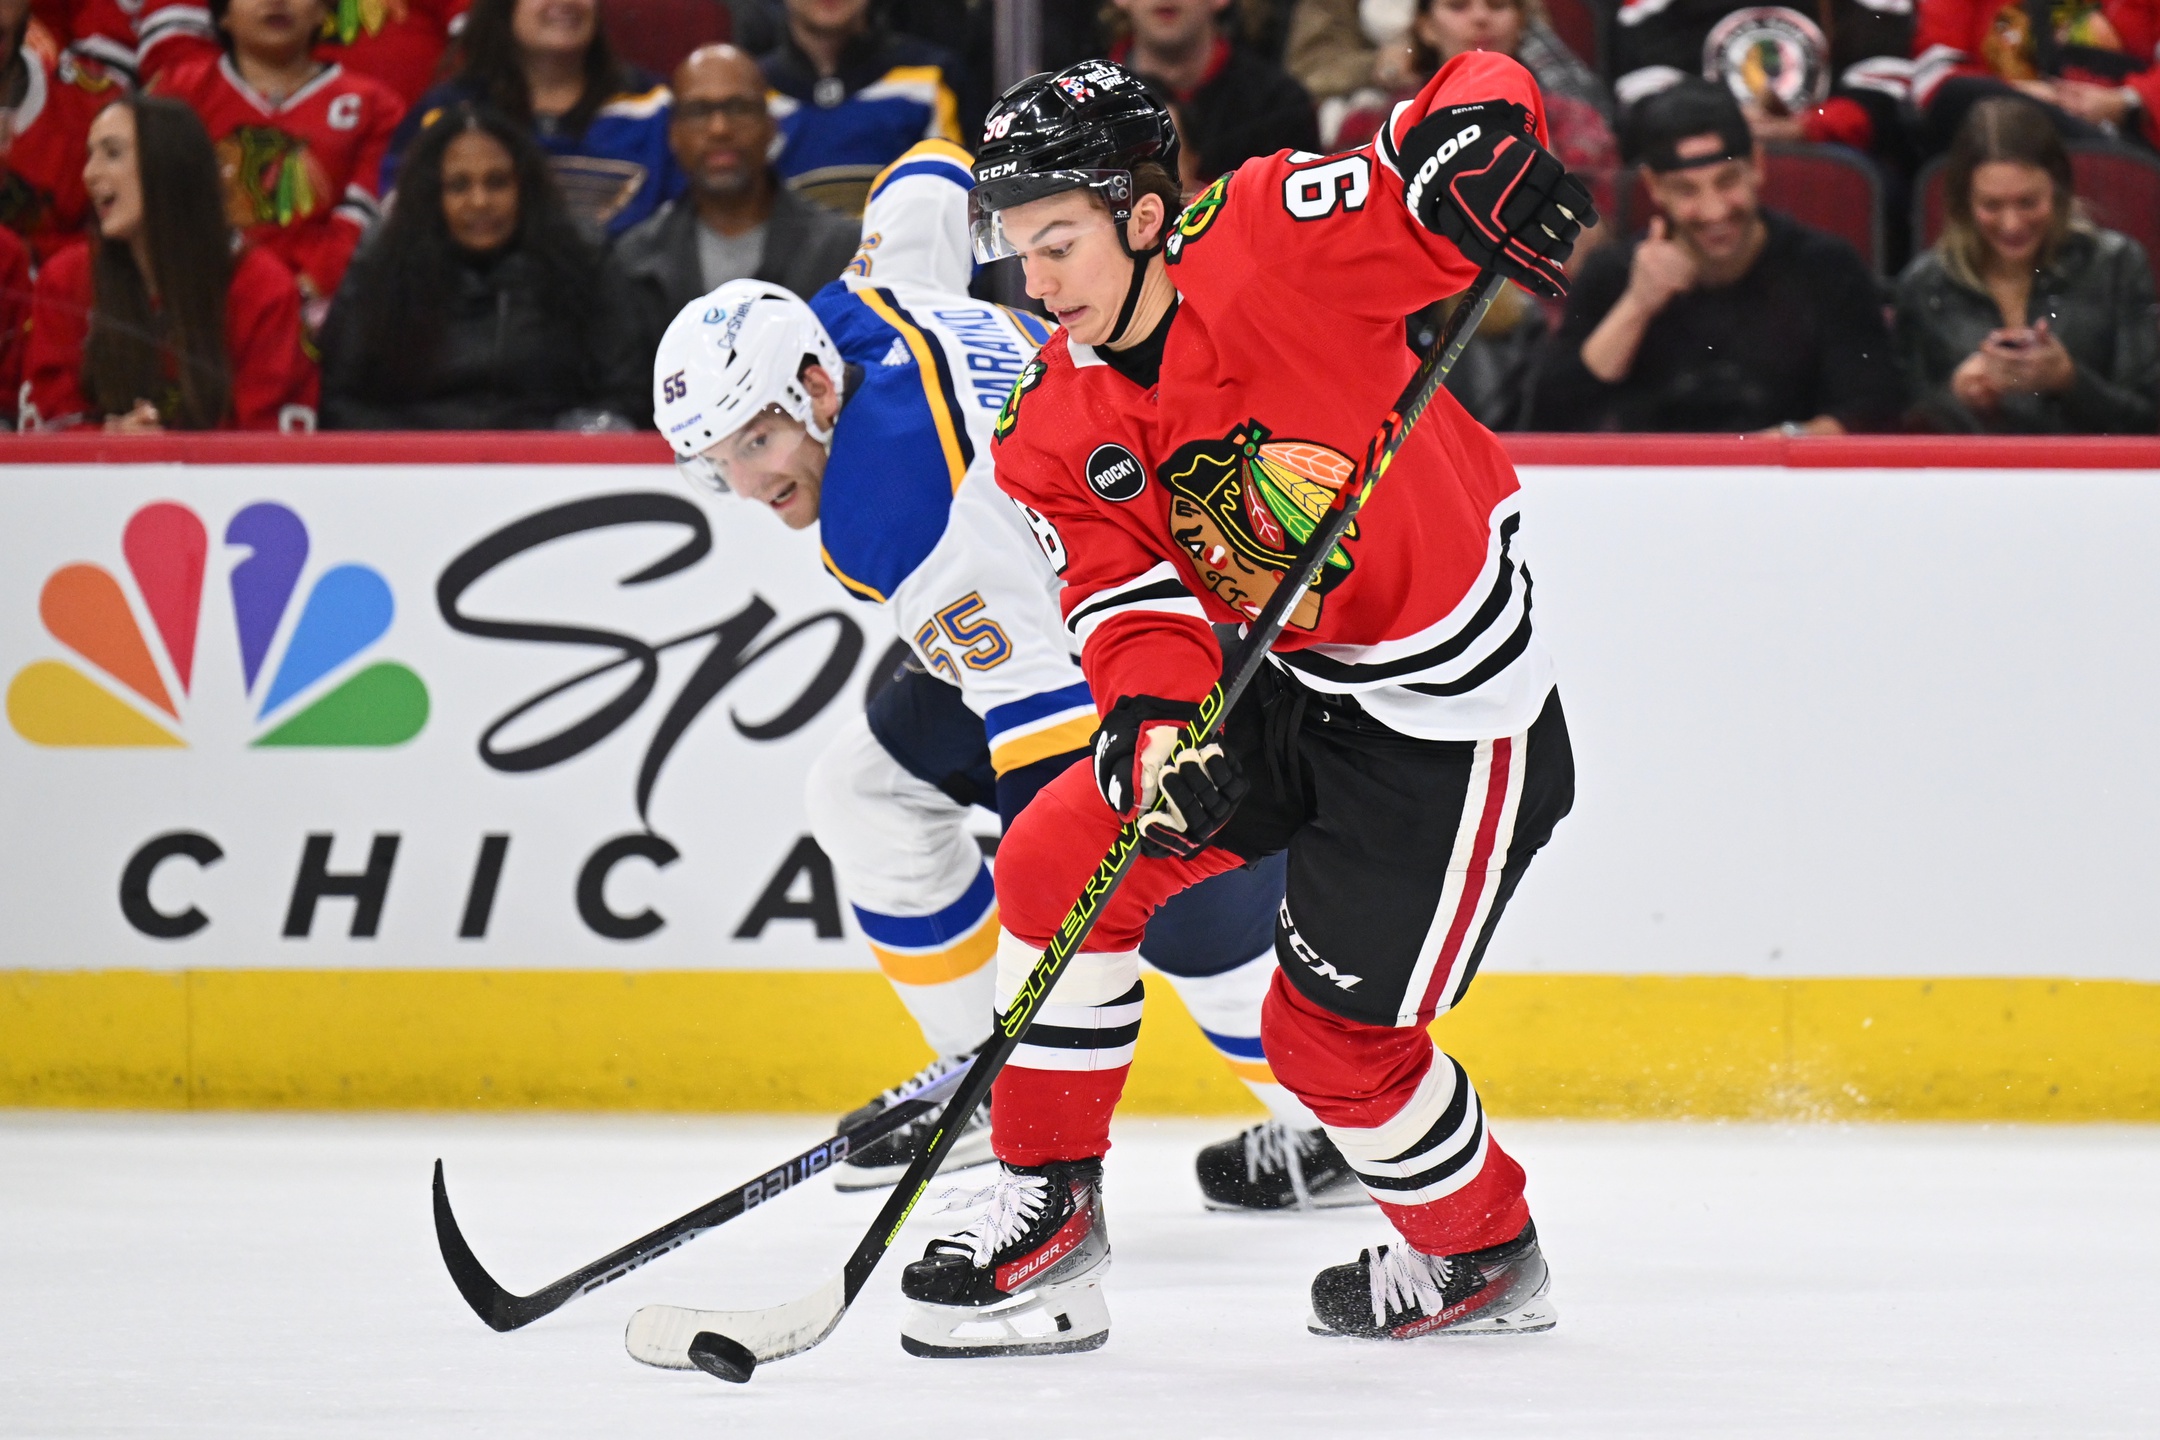 2023 Chicago Blackhawks Predictions with Futures Odds and Expert NHL Picks